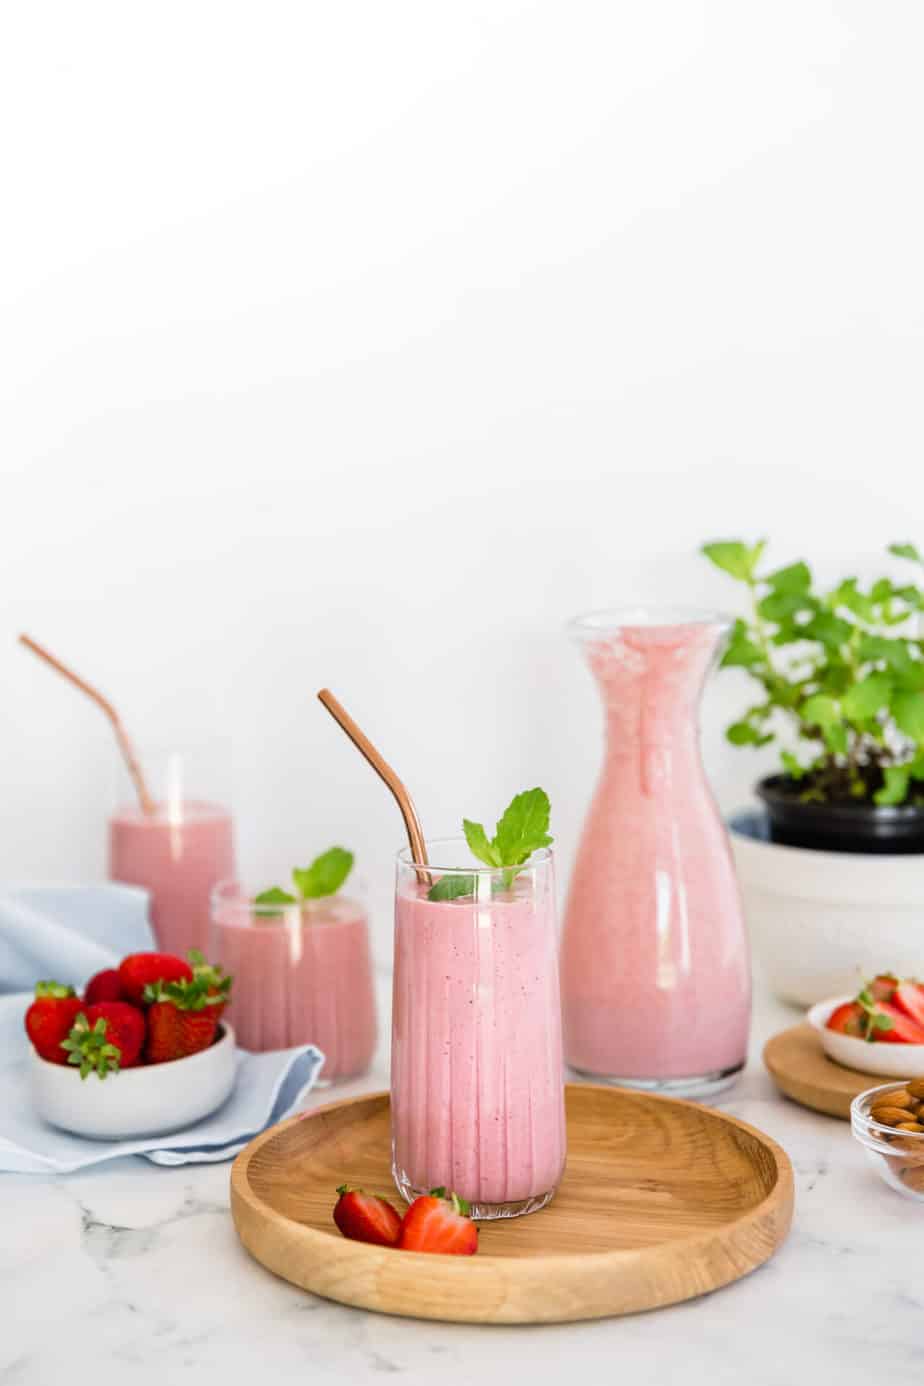 A smoothie in a glass serving glass with a copper straw on a wooden board.